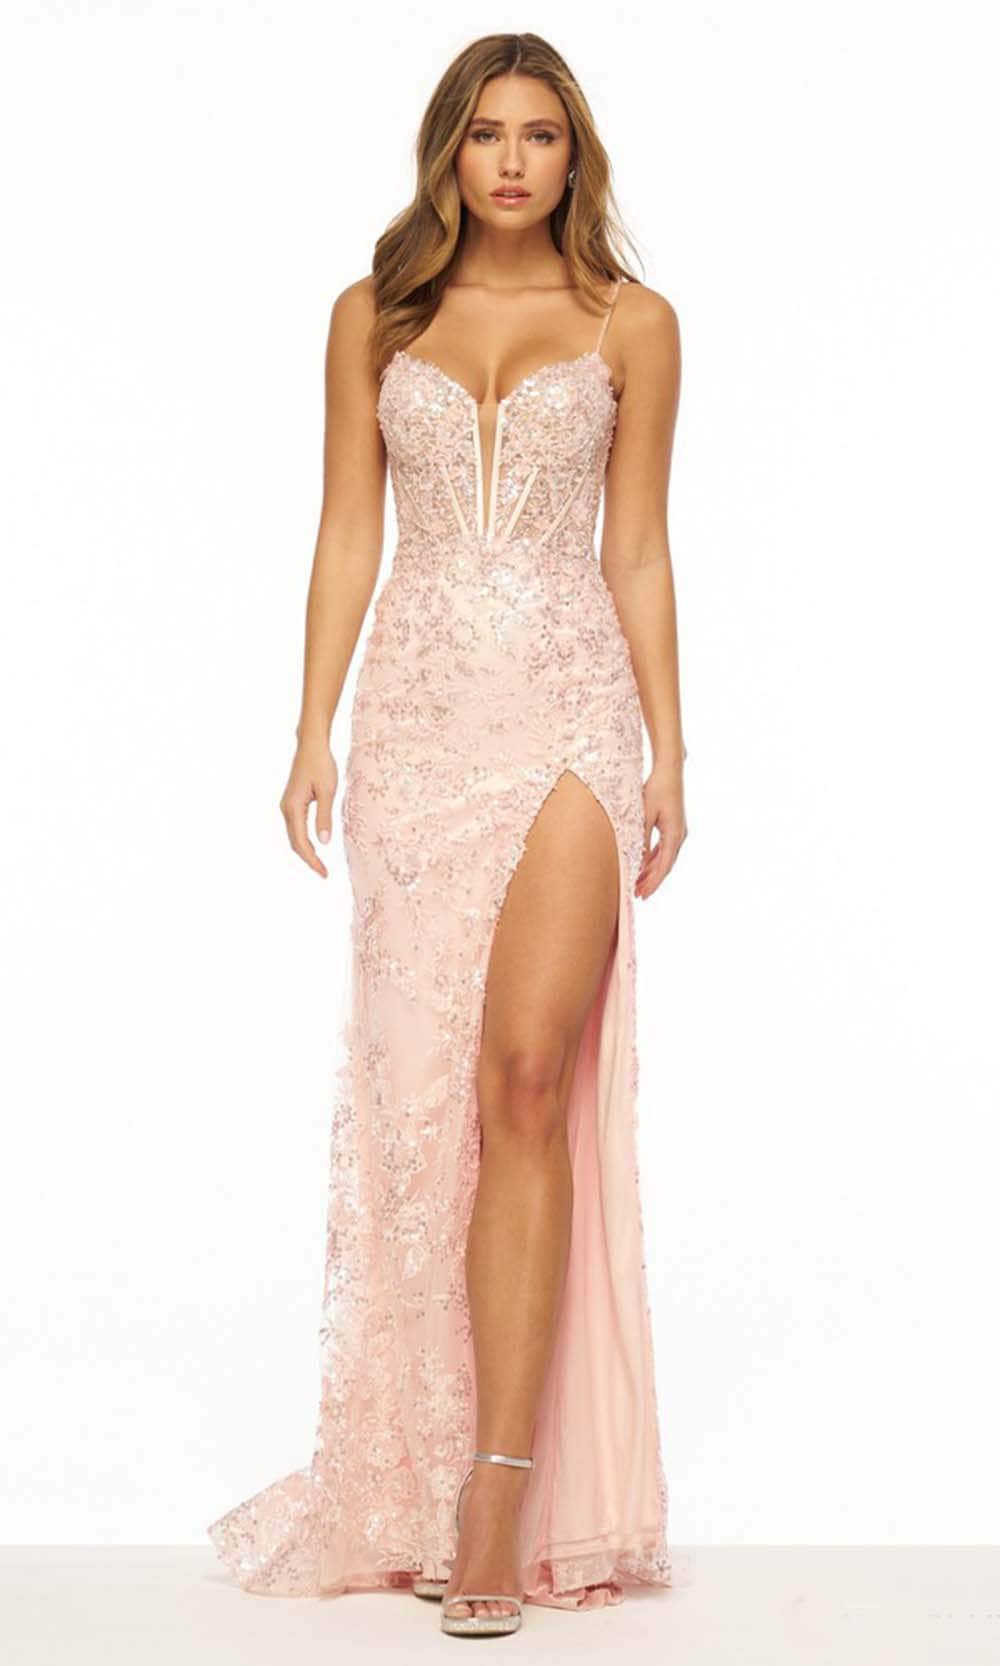 Sherri Hill 56208 - Sequin Embellished Gown
